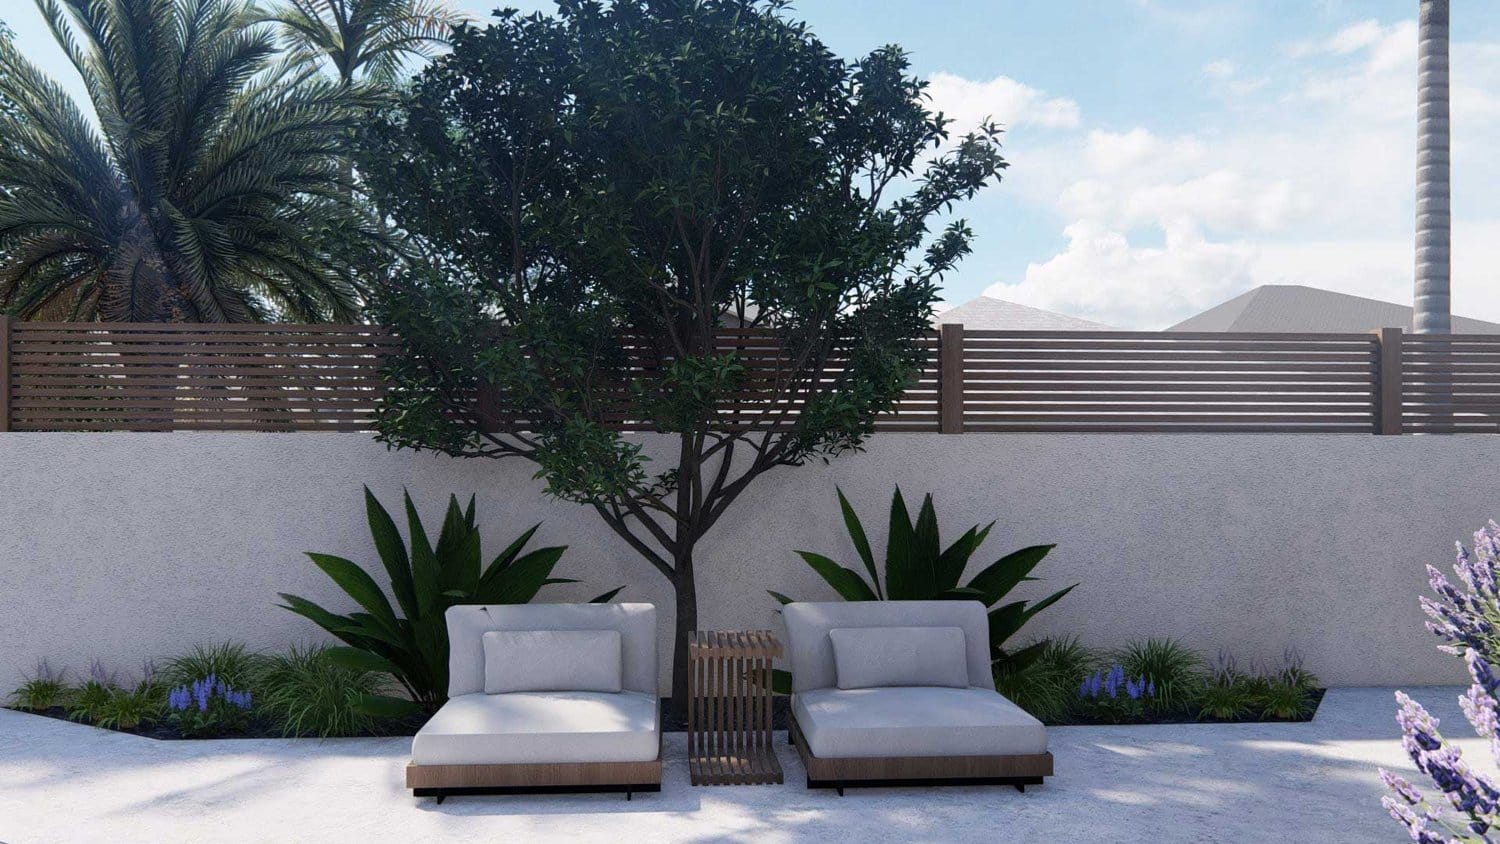 Los Angeles concrete paved side yard with plants, tree and chaise lounge set